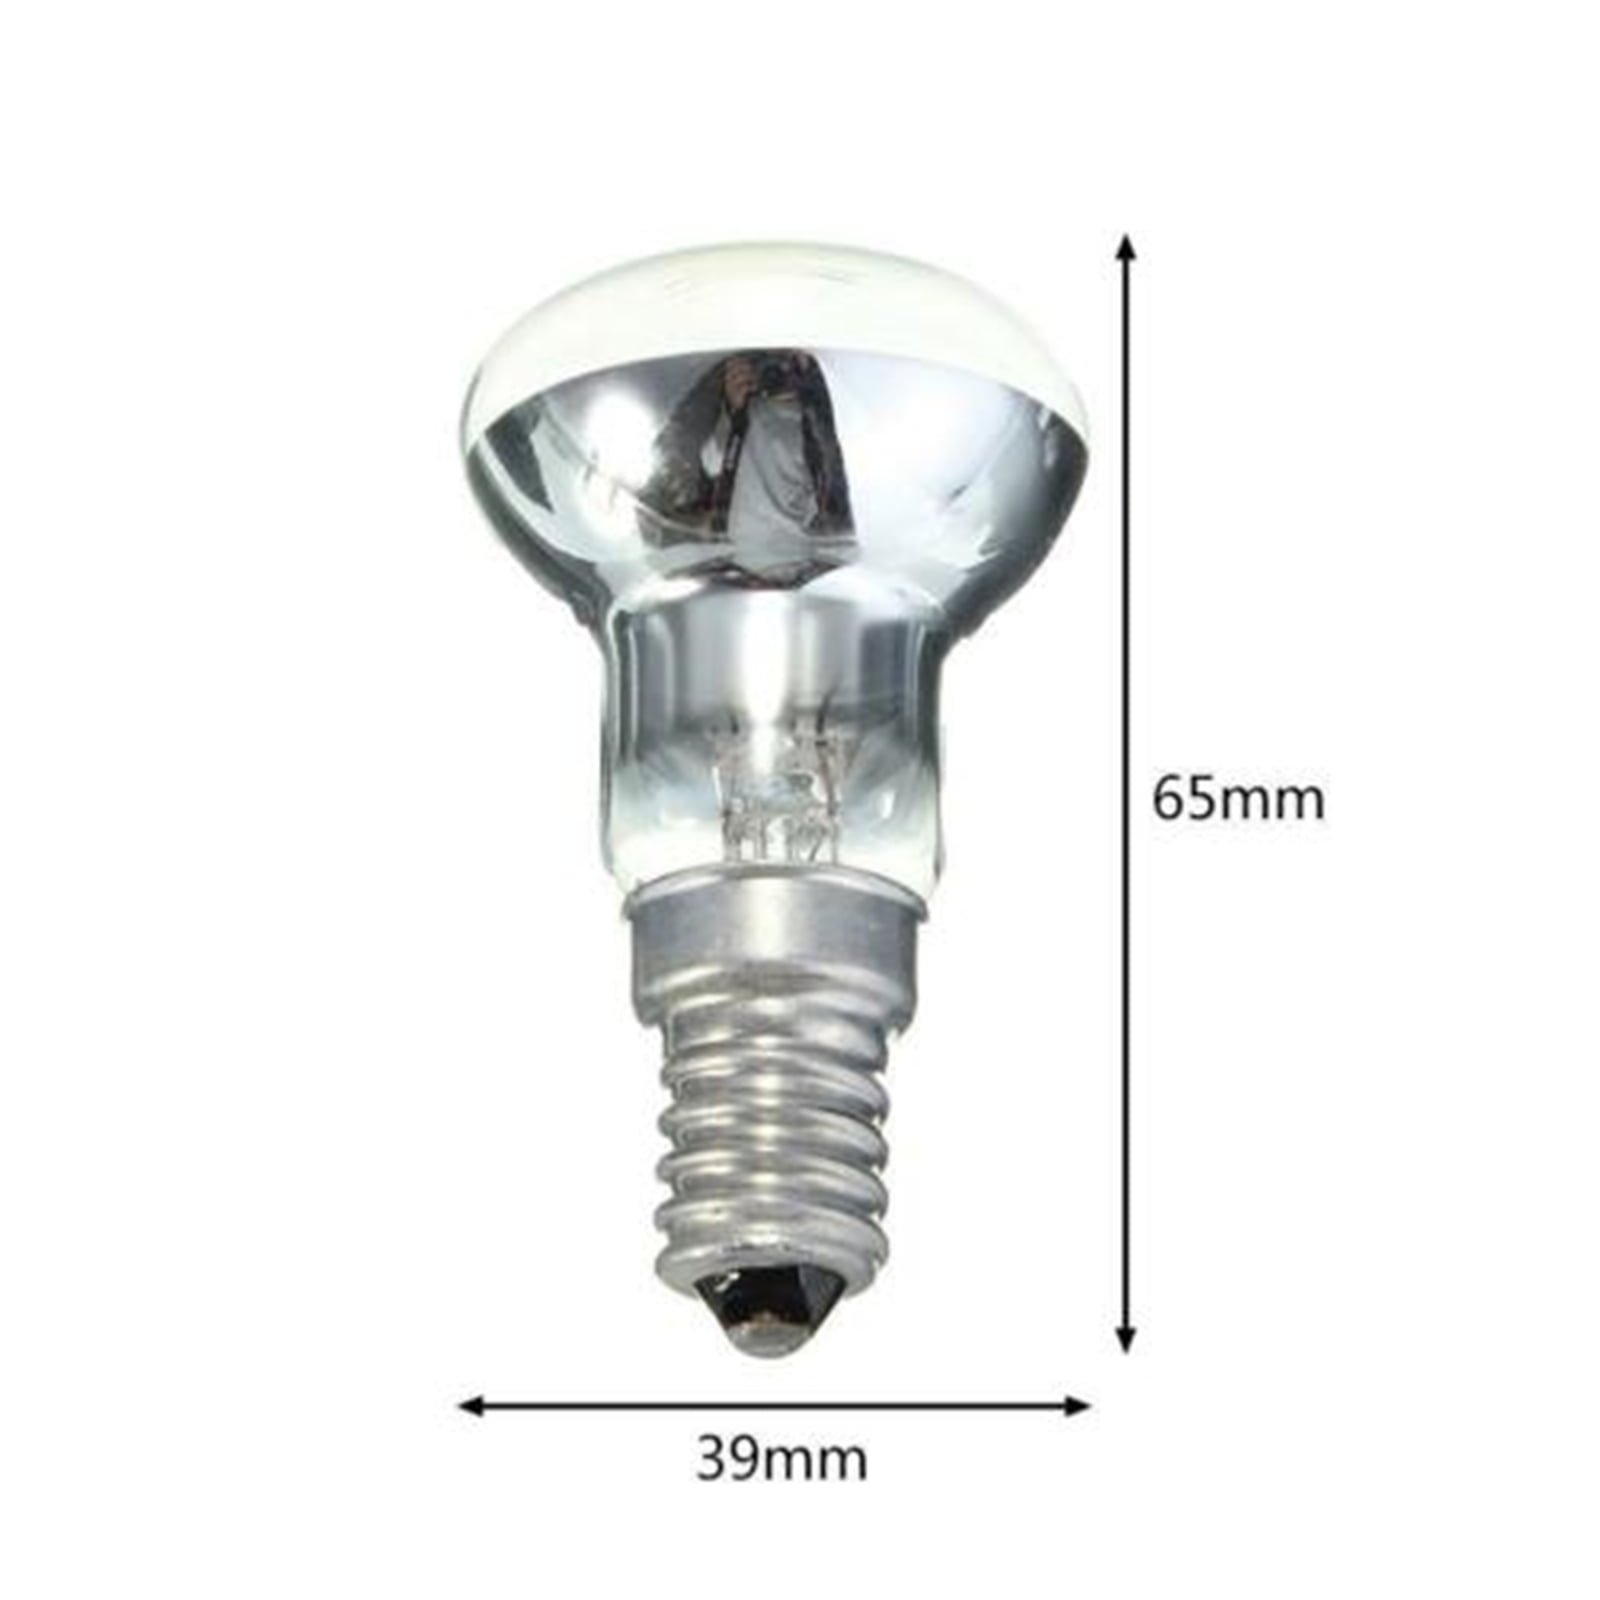 5 PACK E14 R39 Lava Lamp Replacement Bulb 30W Reflector Type Light Screw in Bulb